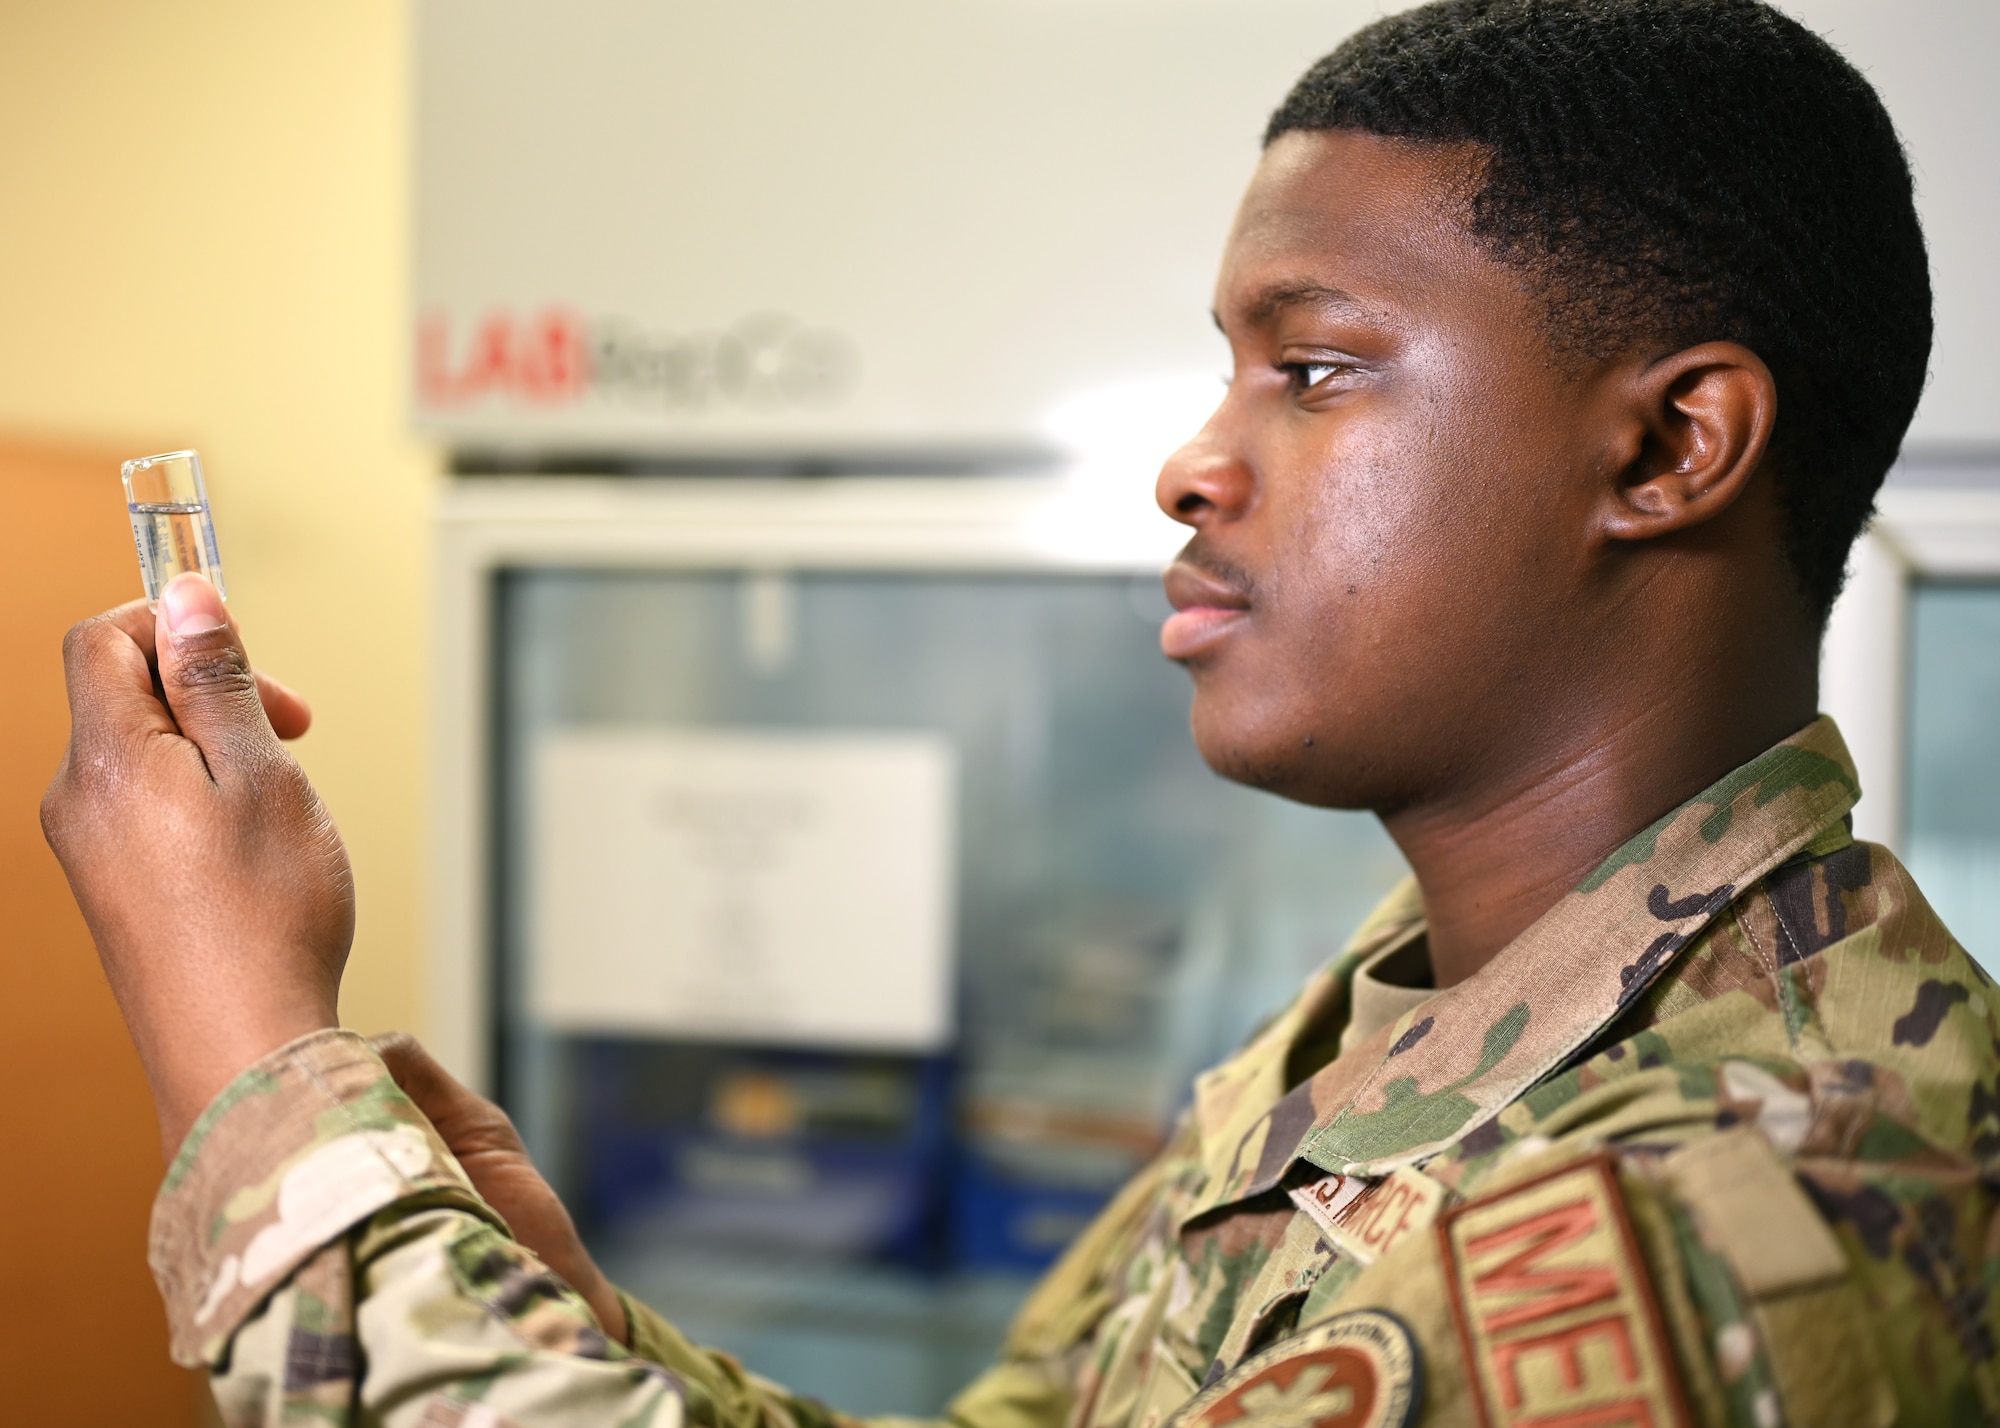 U.S. Air Force Senior Airman Micah Savage, 17th Medical Group immunizations technician, inspects a vial of saline during a demonstration of how vaccines are prepared for injection at the Ross Clinic on Goodfellow Air Force Base, Texas, April 19, 2021. Savage was entrusted as an immunizations technician to administer various vaccines to the base population. (U.S. Air Force photo by Airman 1st Class Michael Bowman)